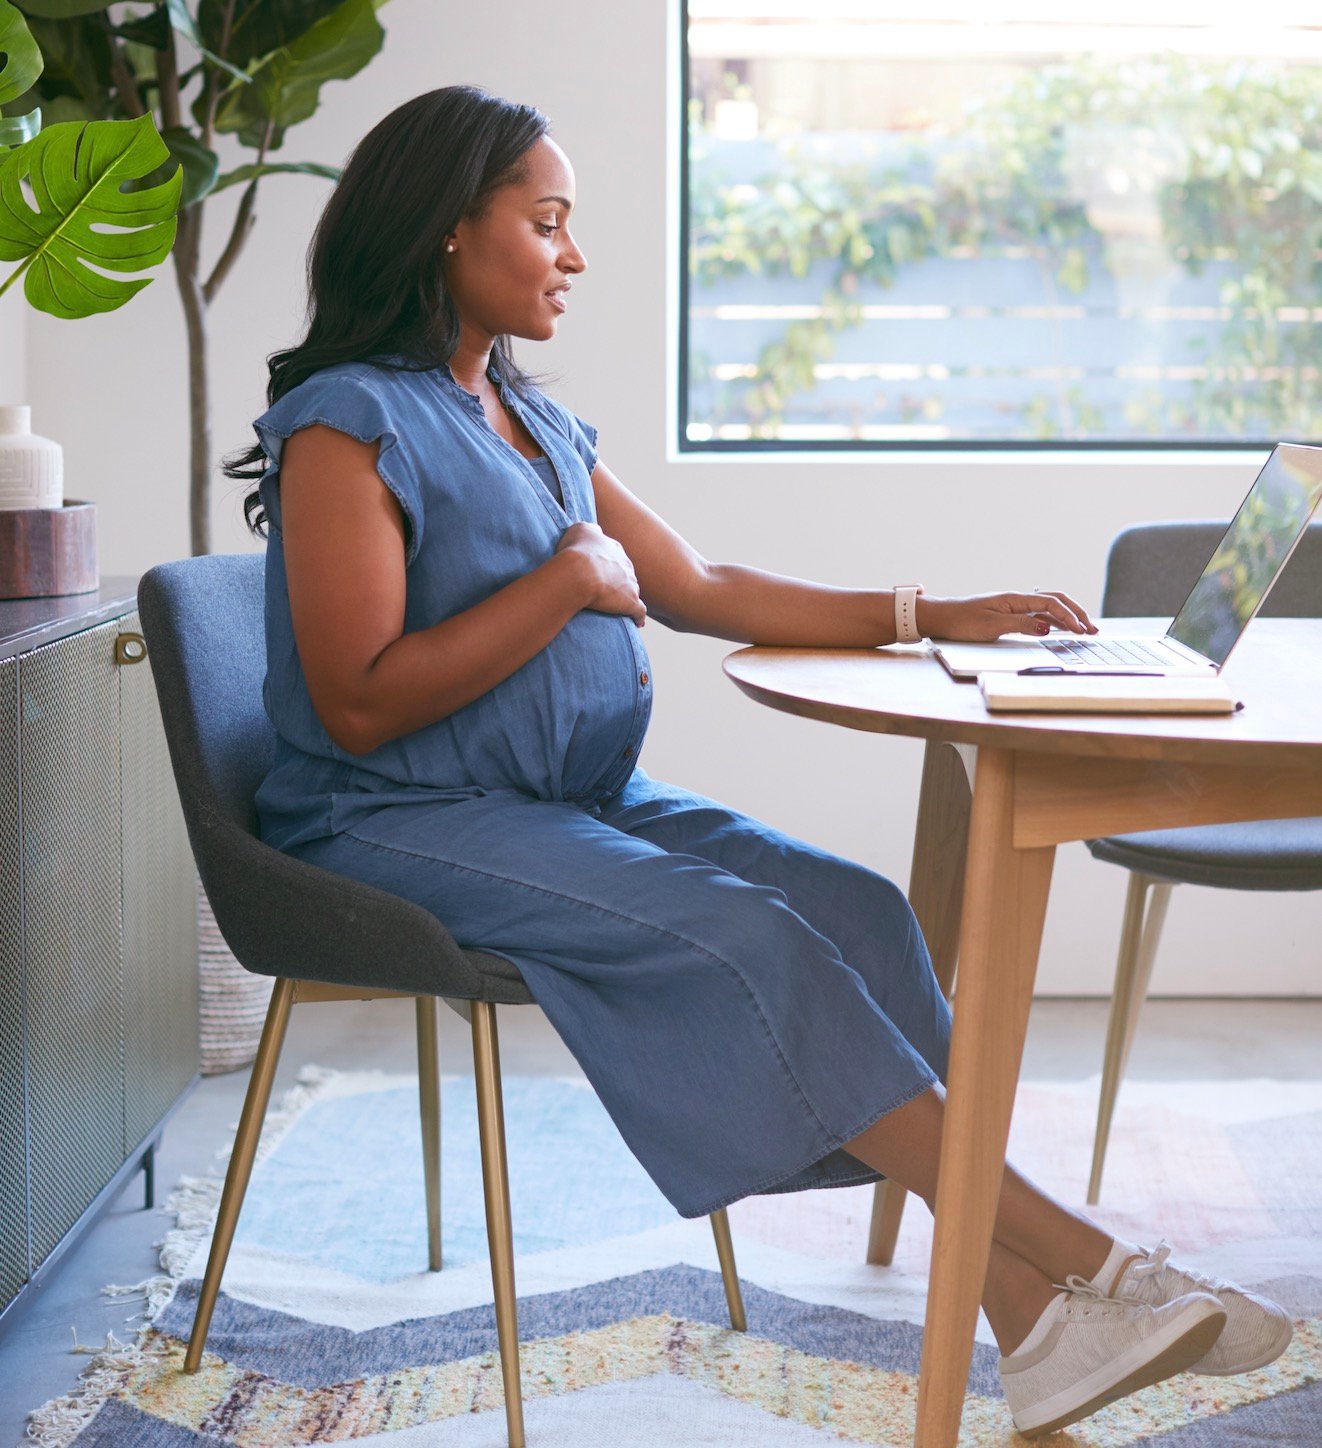 What is the Law Regarding "Maternity Leave" in South Africa?